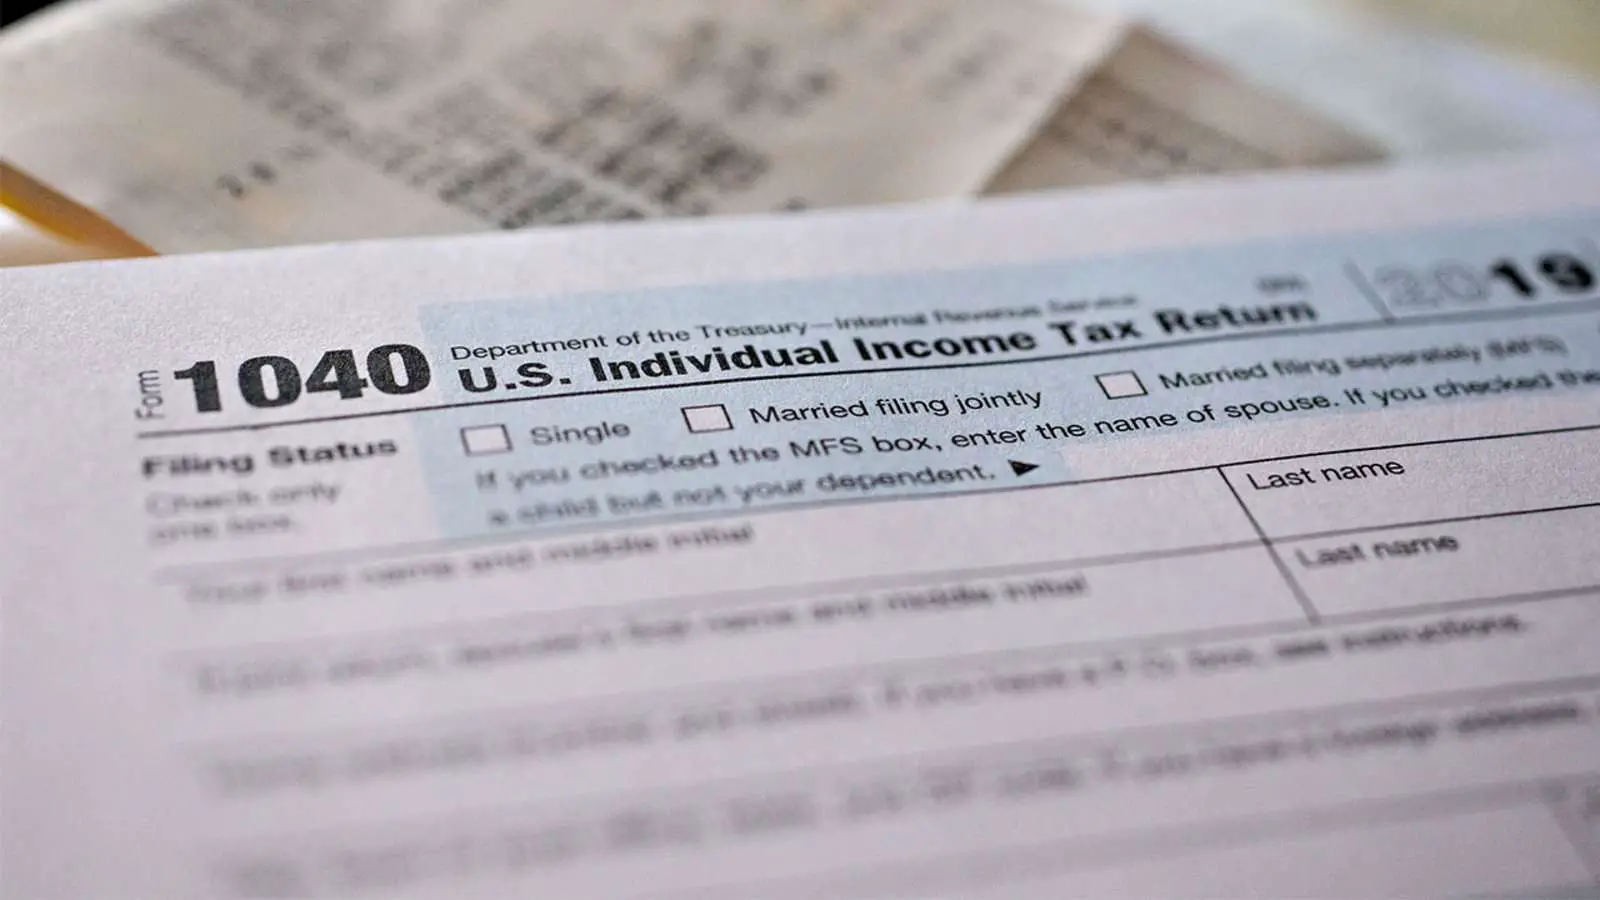 Taxes 2021: Tax filing season delayed until February, IRS ...